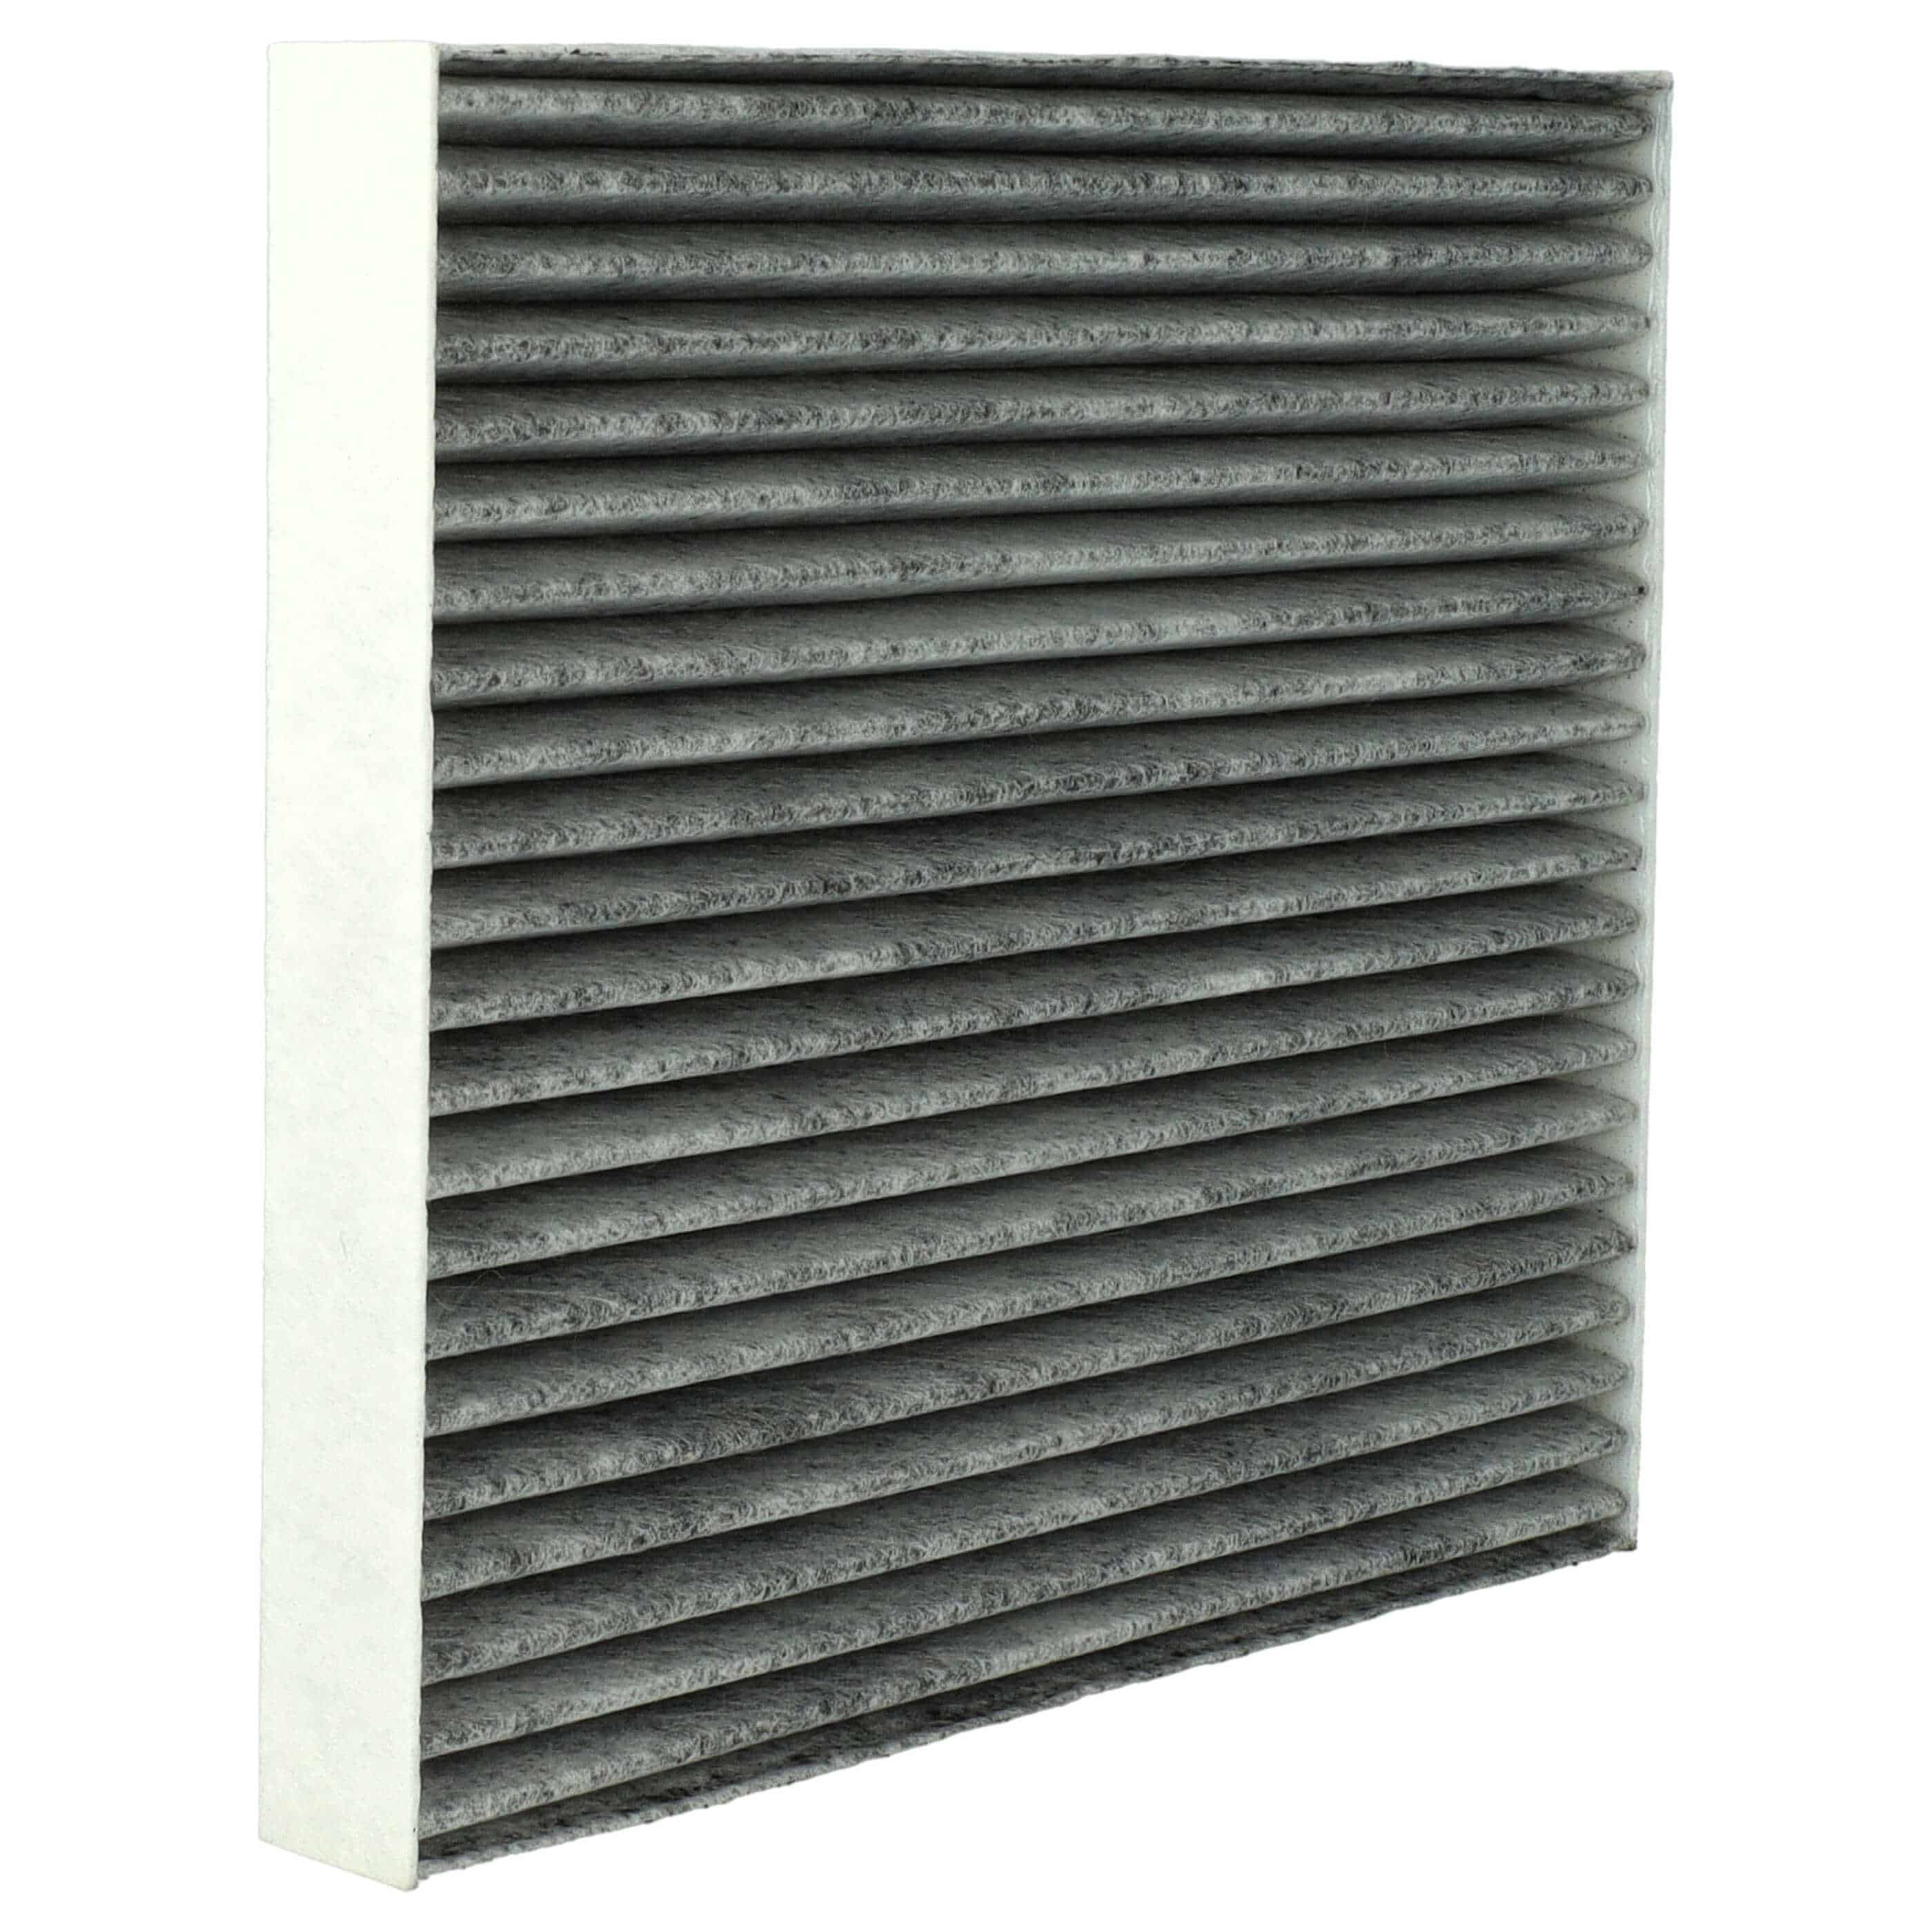 Cabin Air Filter replaces 1A First Automotive C30257, C30261 etc.